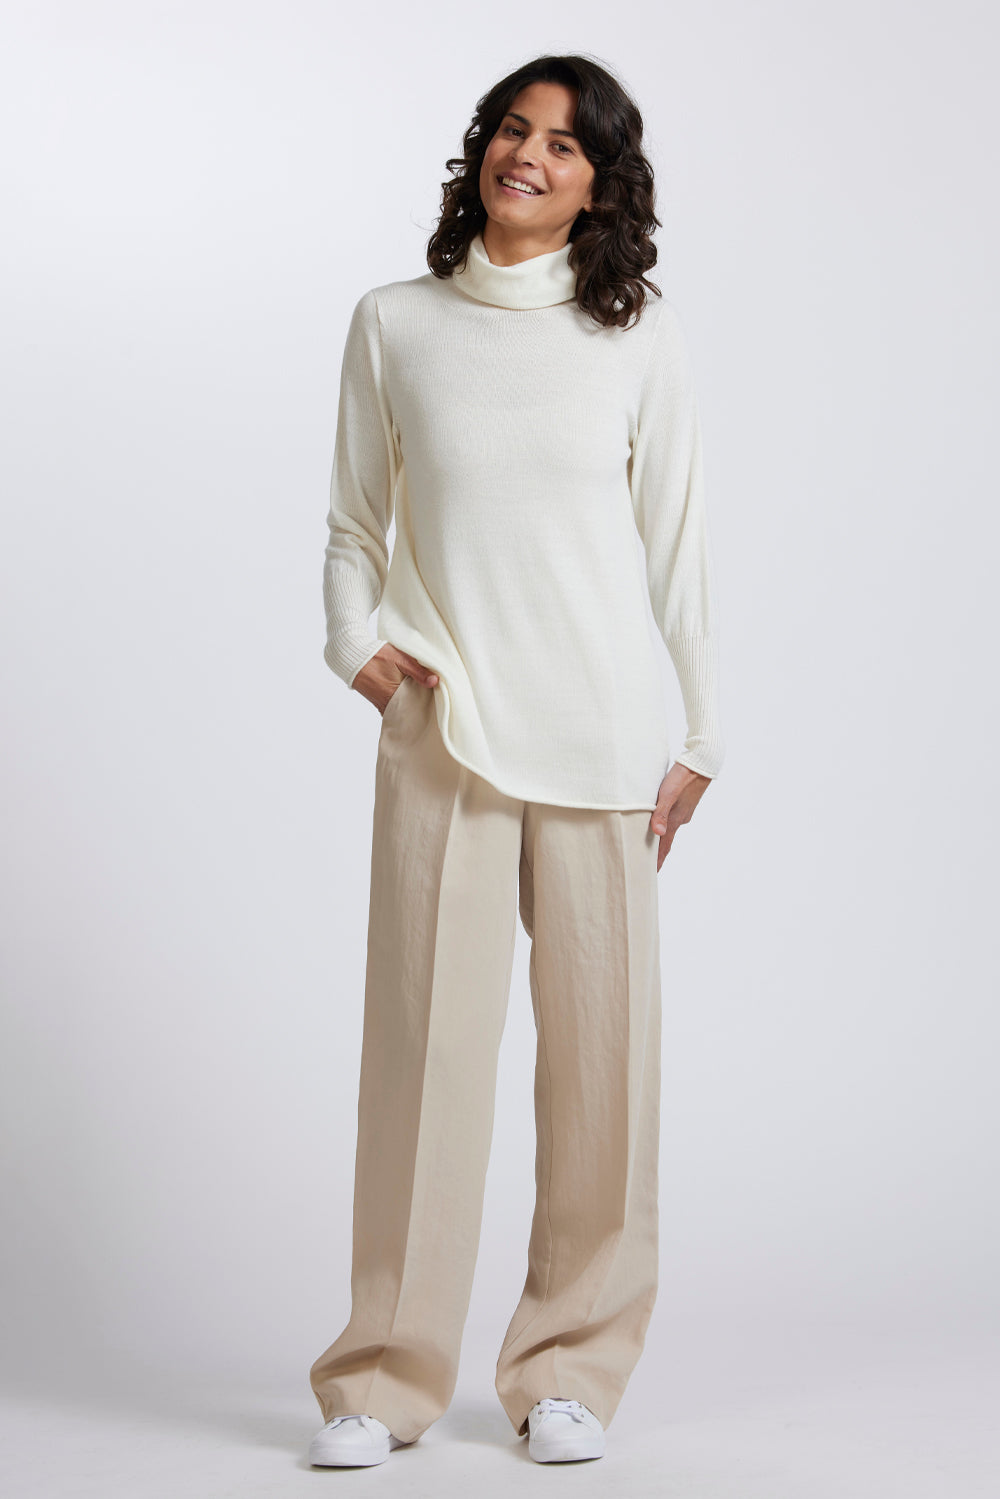 A-Line Funnel Neck Sweater in Natural by Royal Merino